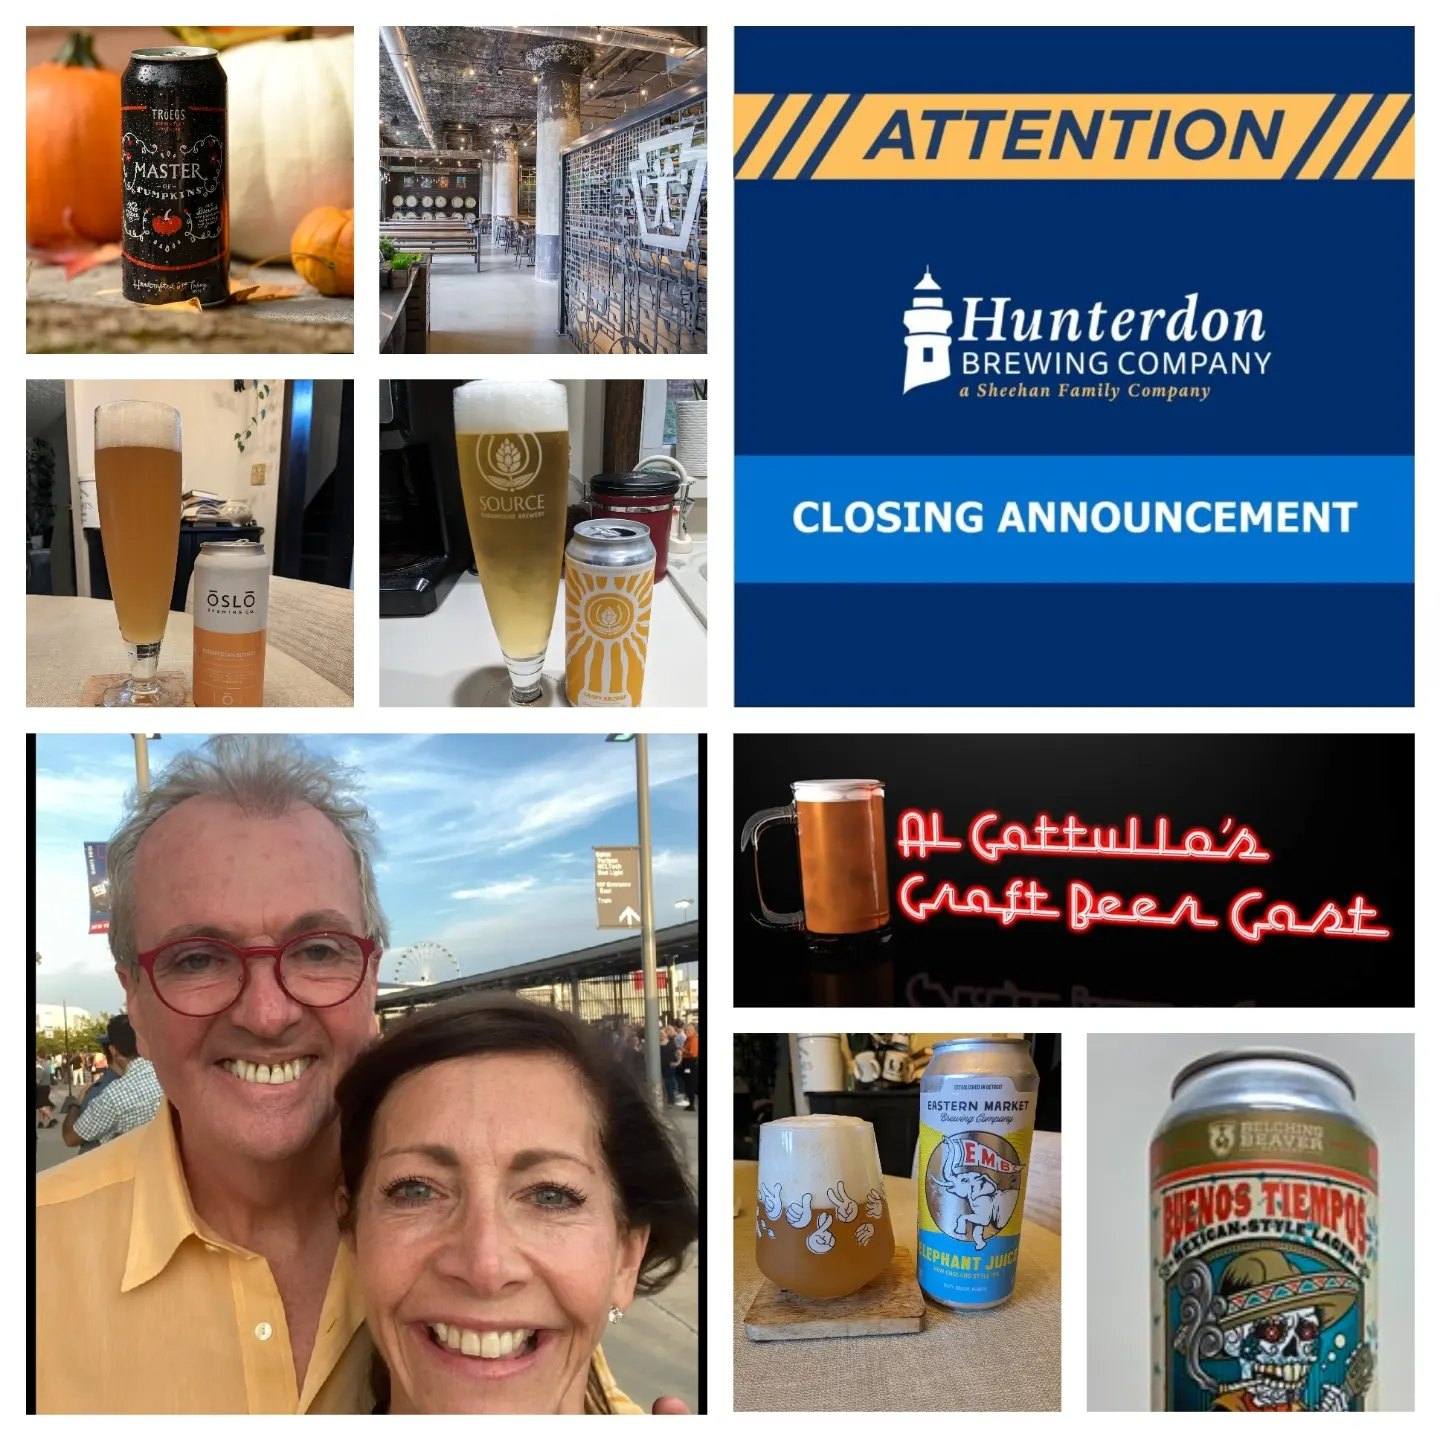 AG Craft Beer Cast 9-24-23 All News Edition